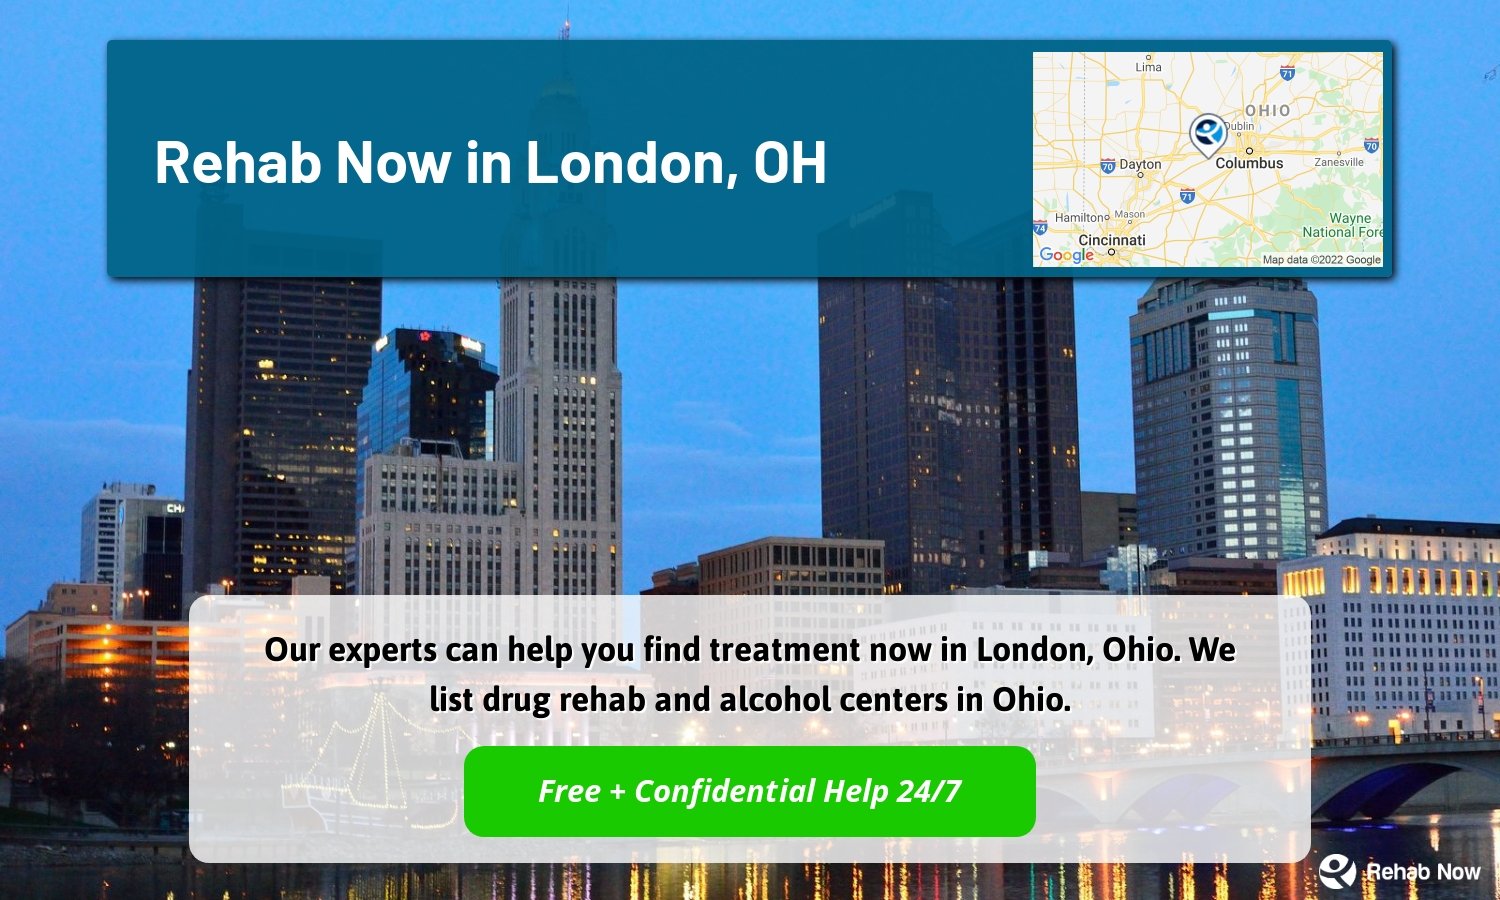 Our experts can help you find treatment now in London, Ohio. We list drug rehab and alcohol centers in Ohio.